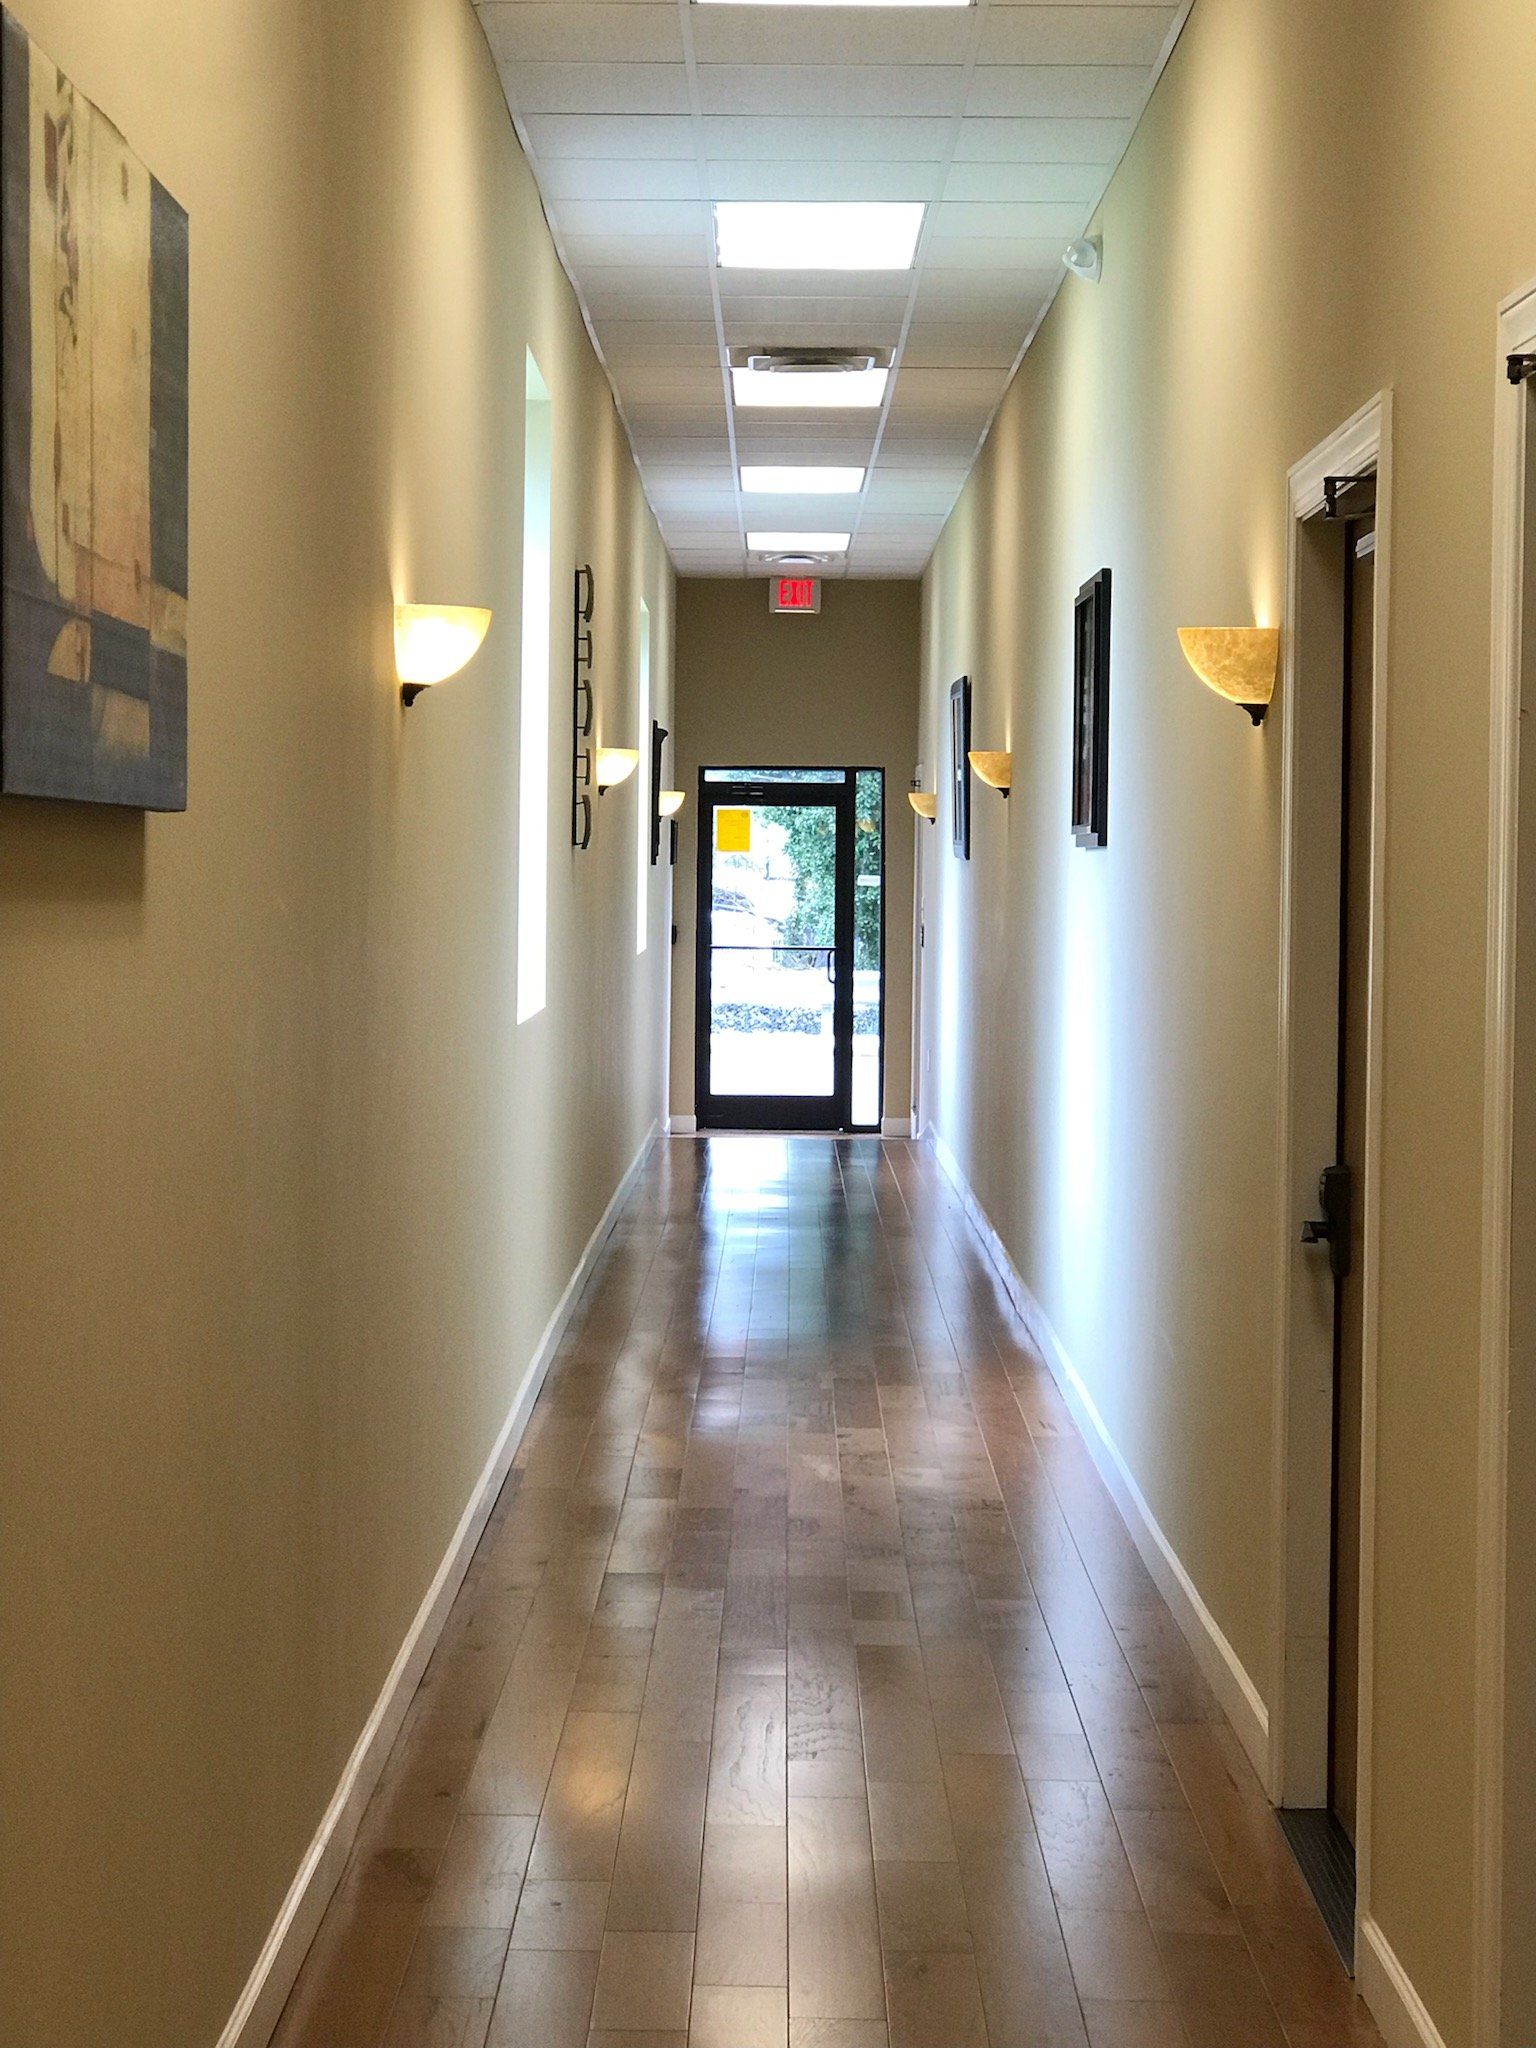 Jamestown @ Shelby Interior Hallway leading to Office Suites & retail space